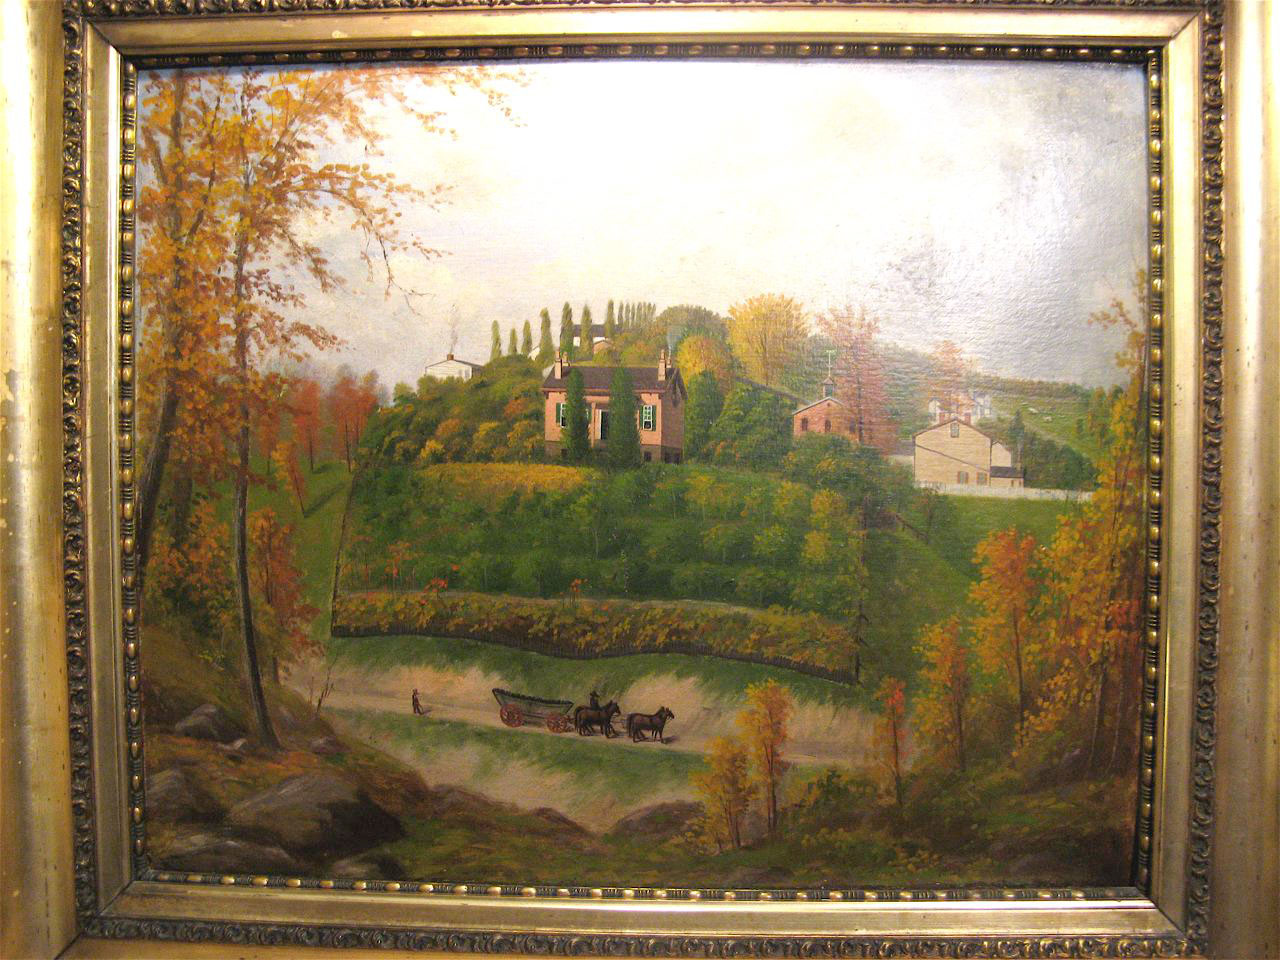 Oil Painting of house on hill with wagon and horses in foreground